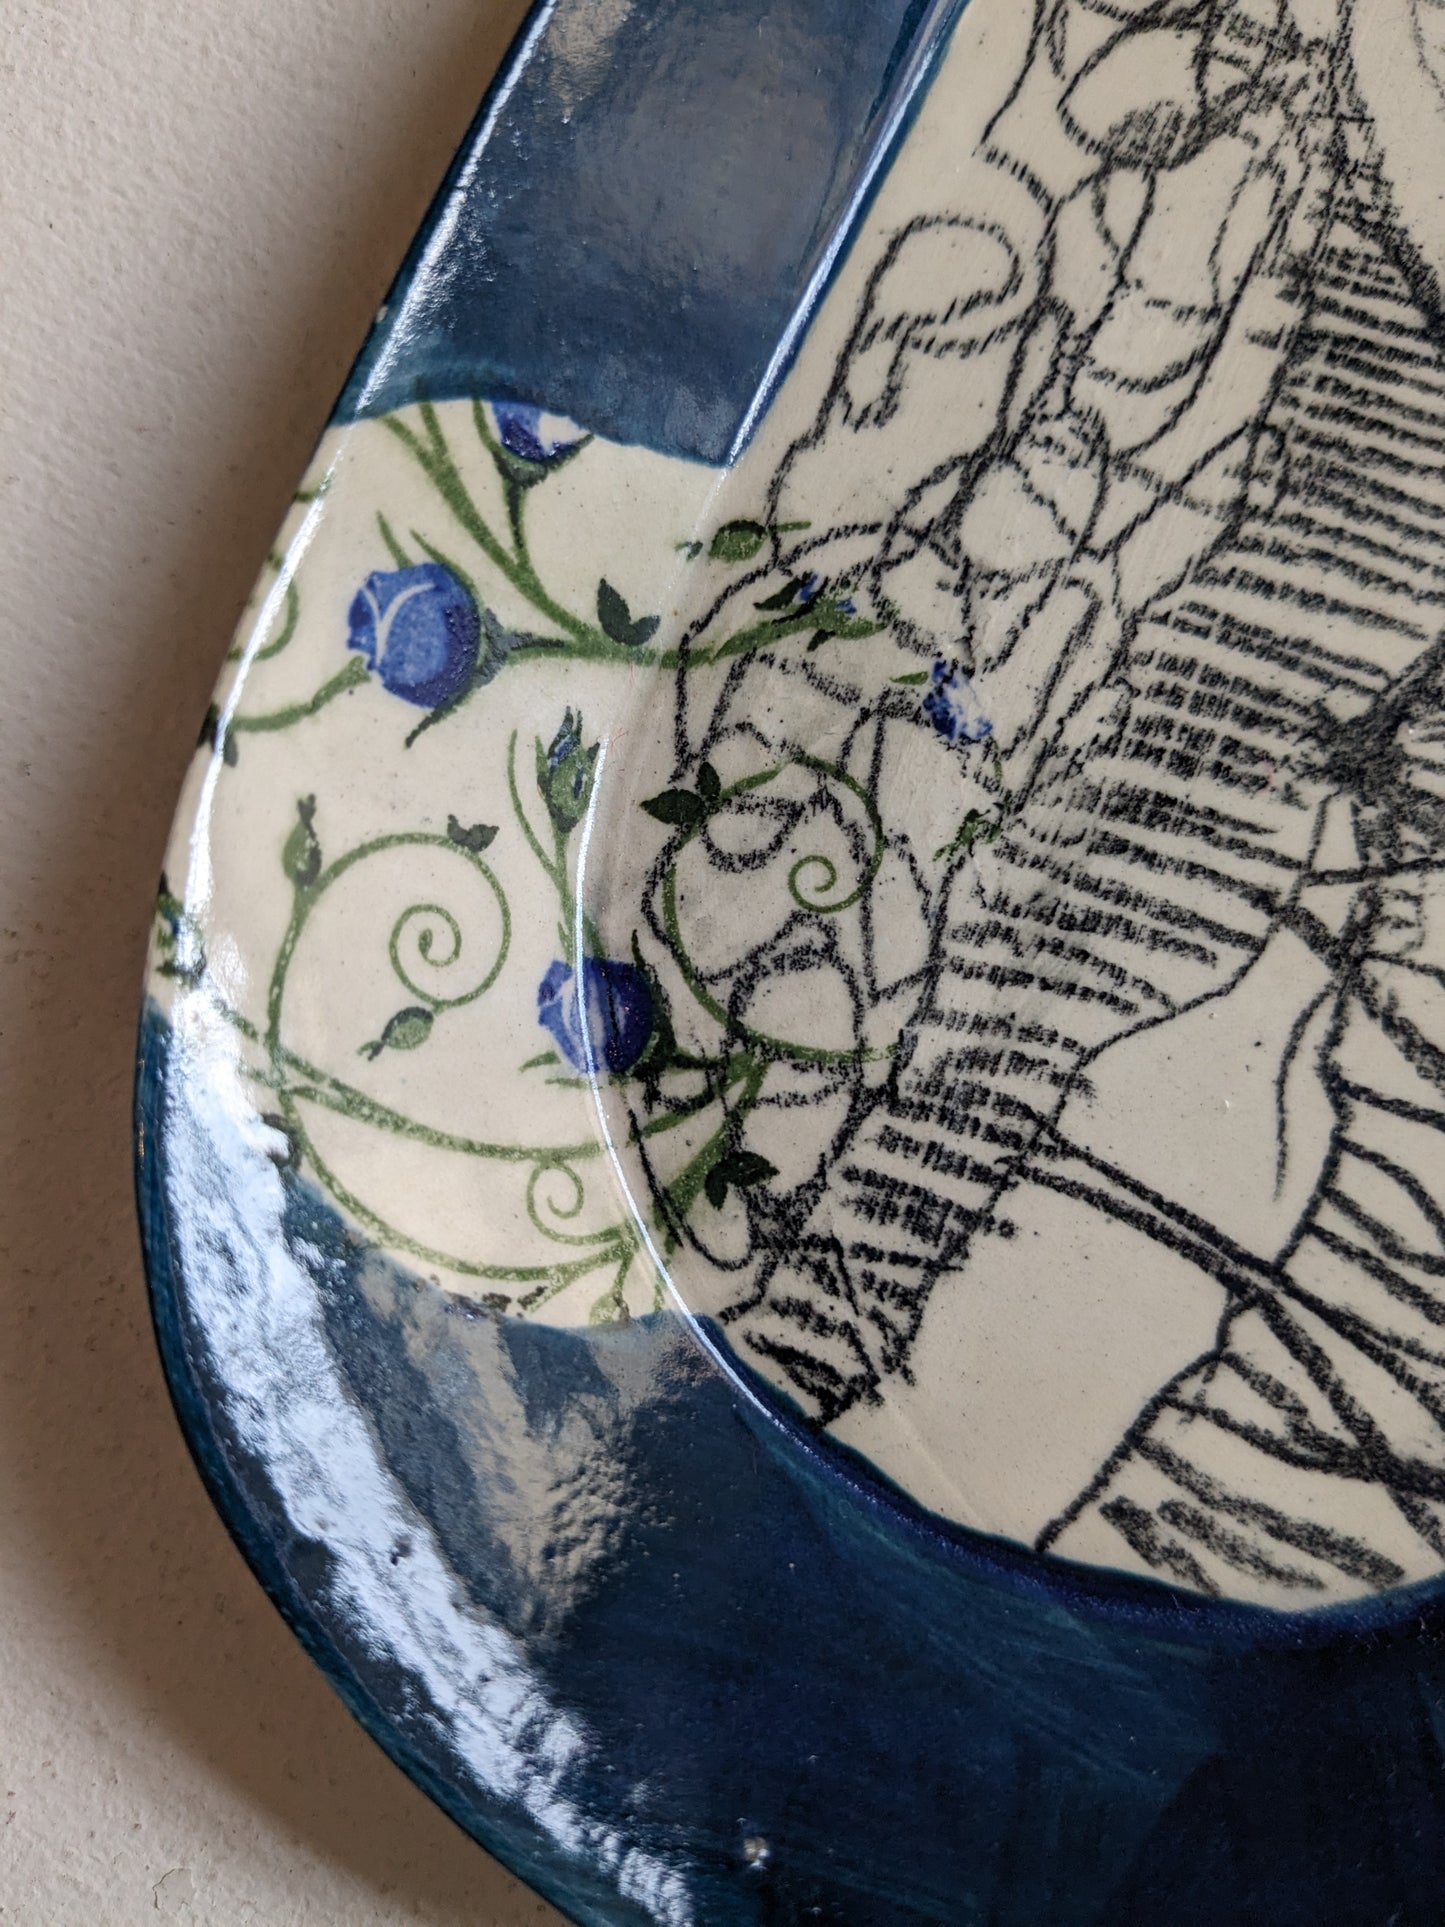 Cannell, Sarah - Ceramic Plate